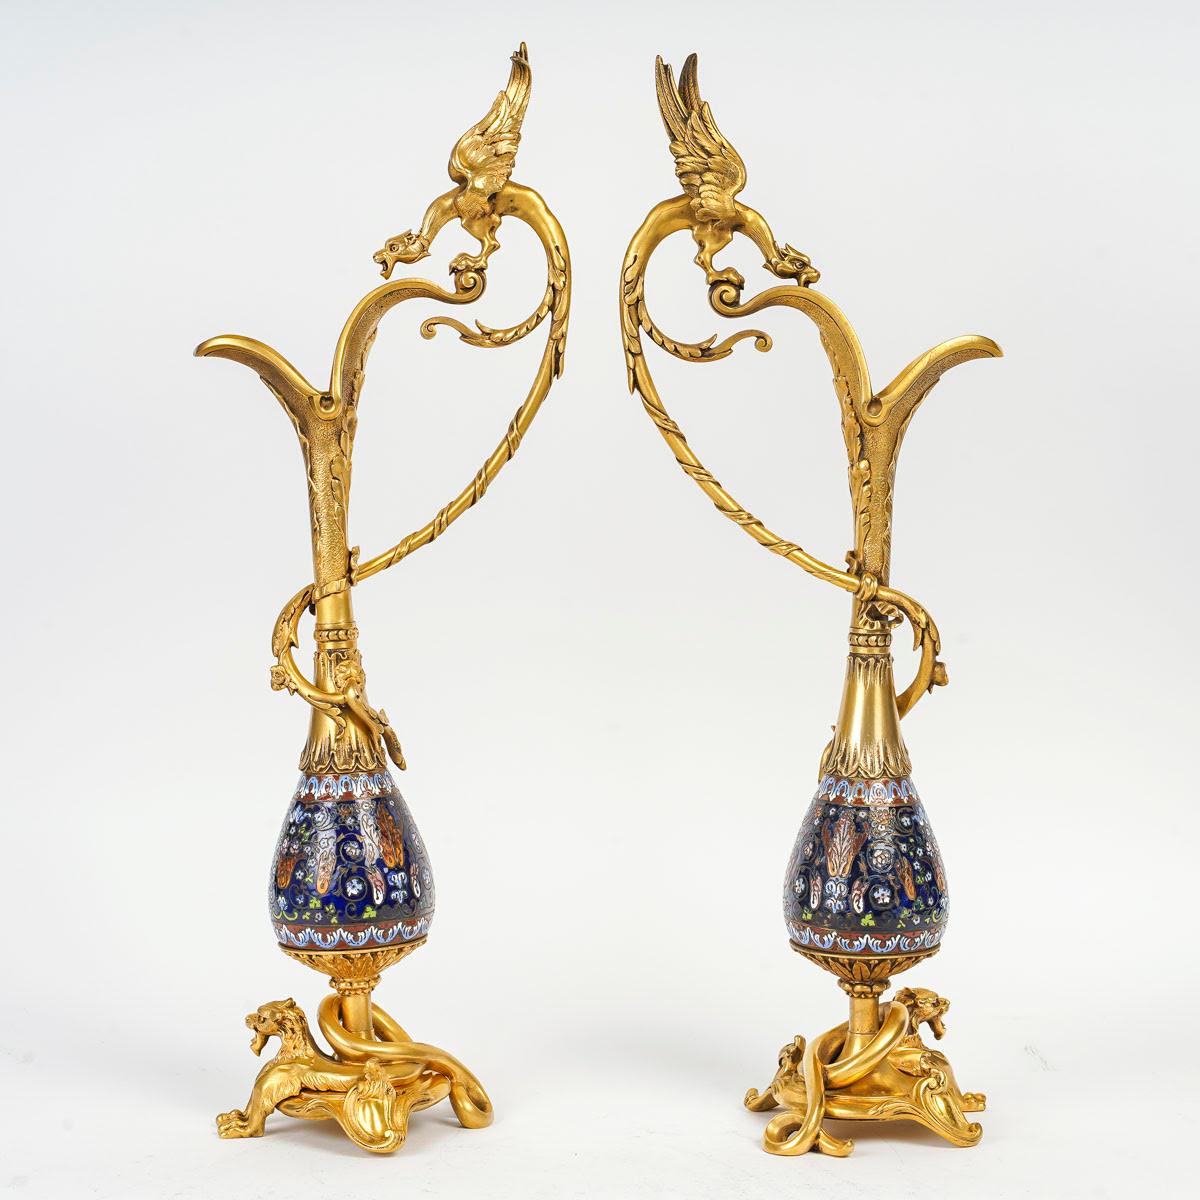 19th Century Pair of Ewers in Chased and Gilt Bronze, Neo-Gothic Style, Napoleon III Period.